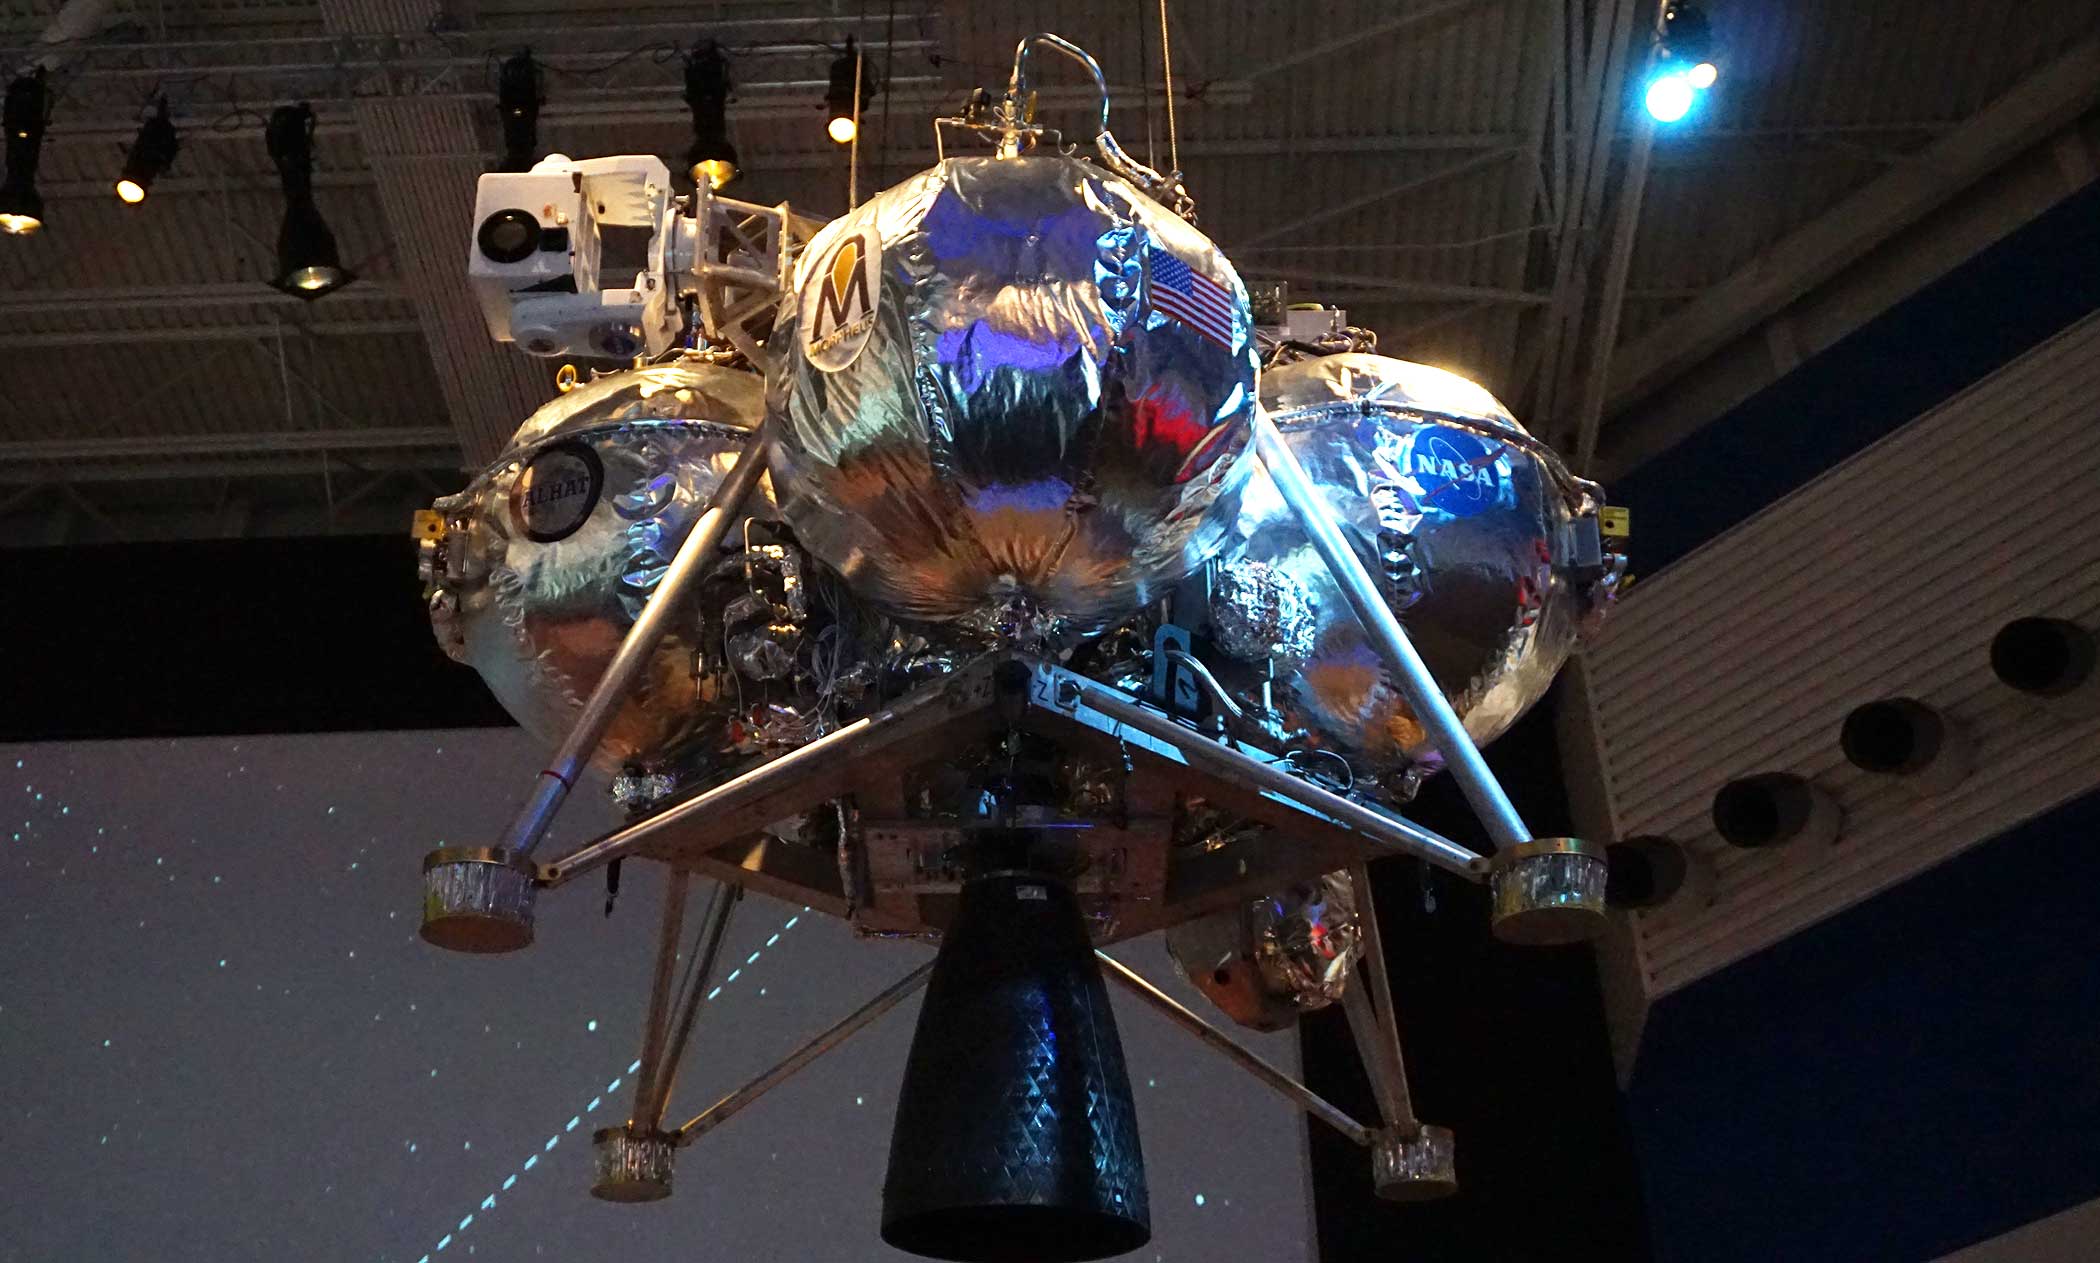 Project Morpheus Lander hanging at "Mission Mars" exhibit in Space Center Houston. Photo by signal reporter Miles Shellshear